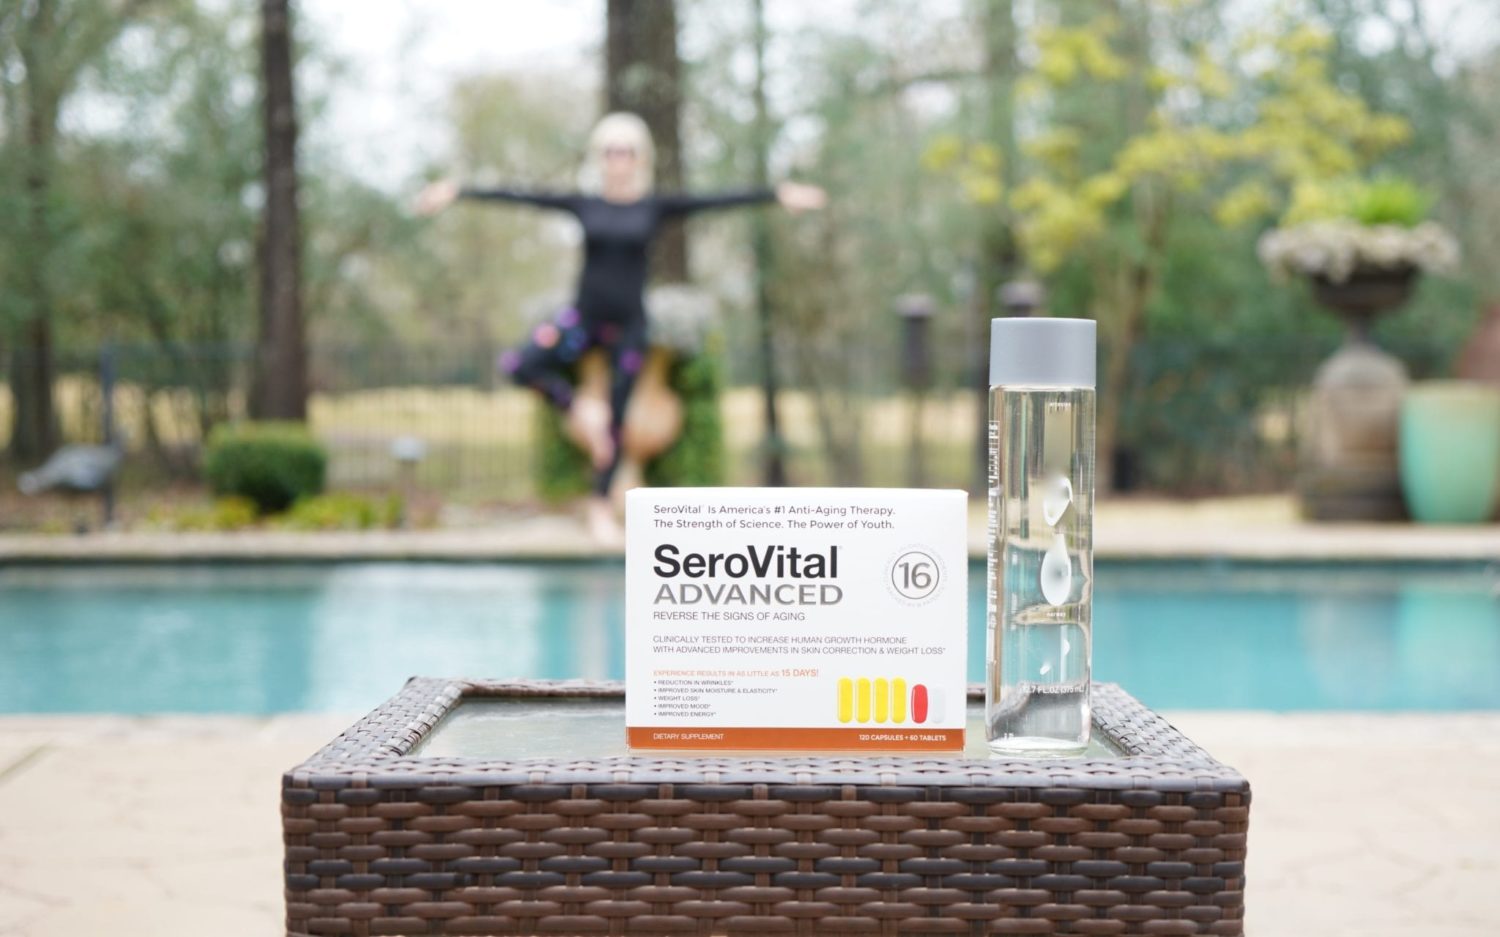 box of Serovital Advanced supplements on table by swimming pool